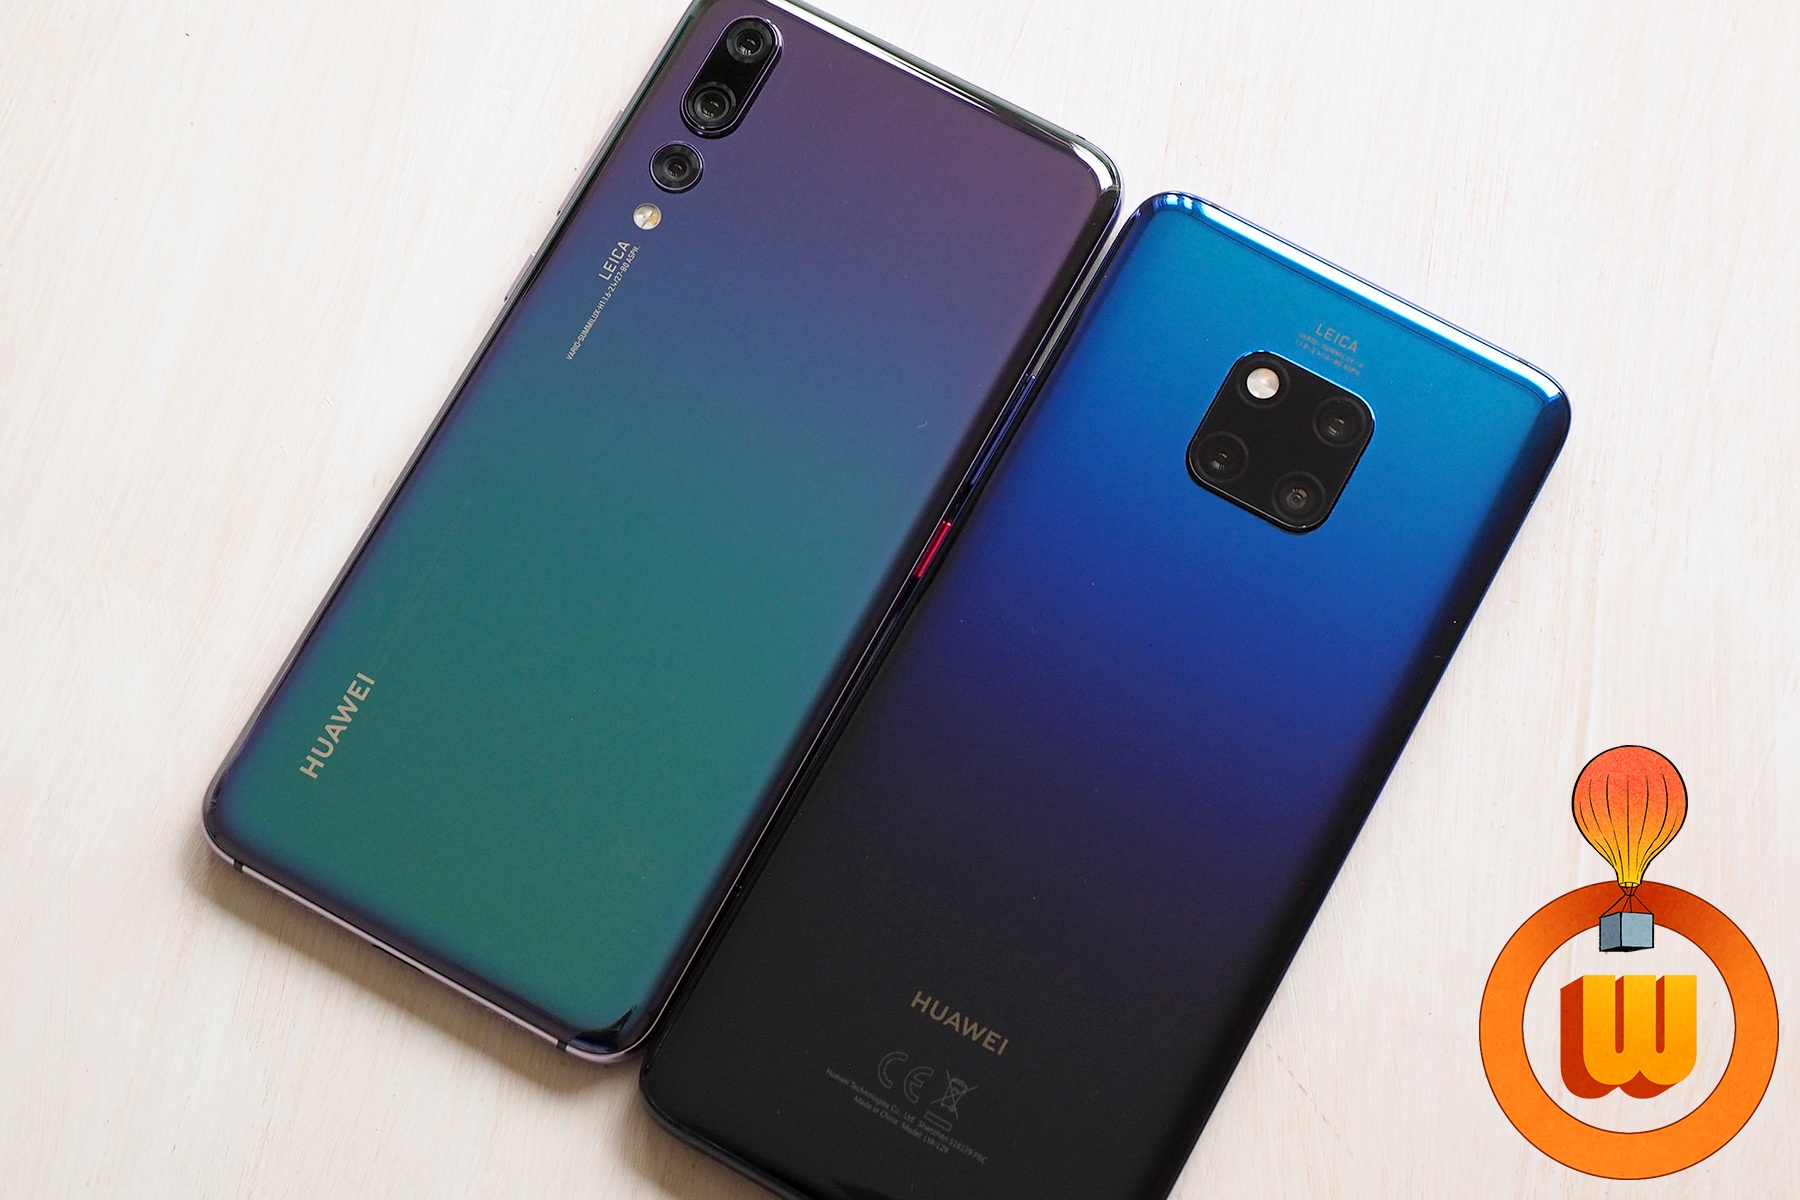 Huawei In 2018 Smartphone Excellence And Strained Relations